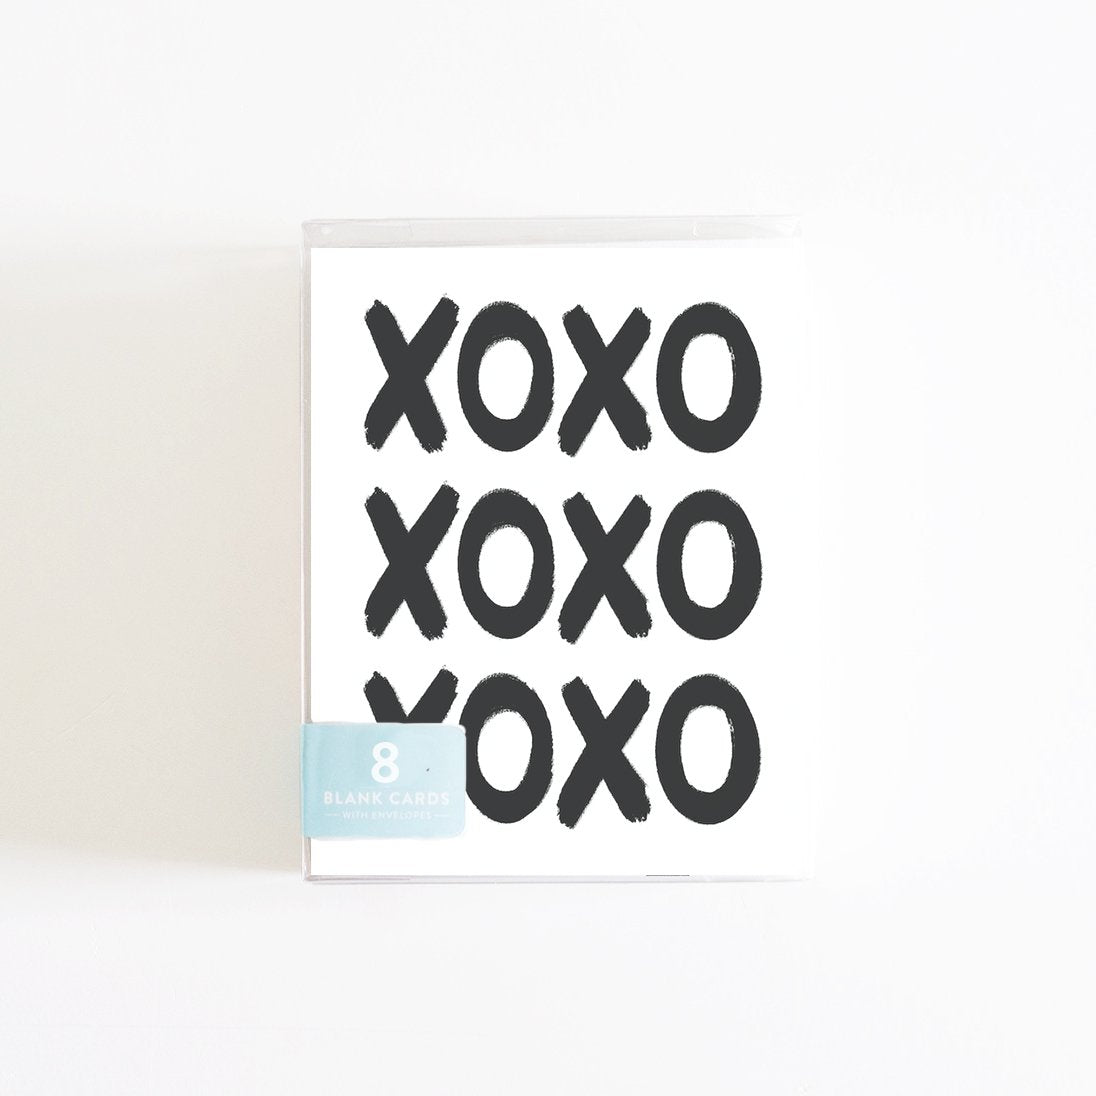 XOXO Boxed Set of 8 Cardscategory_Office & Desk Accessories from Joy Paper Co. - SHOPELEOS